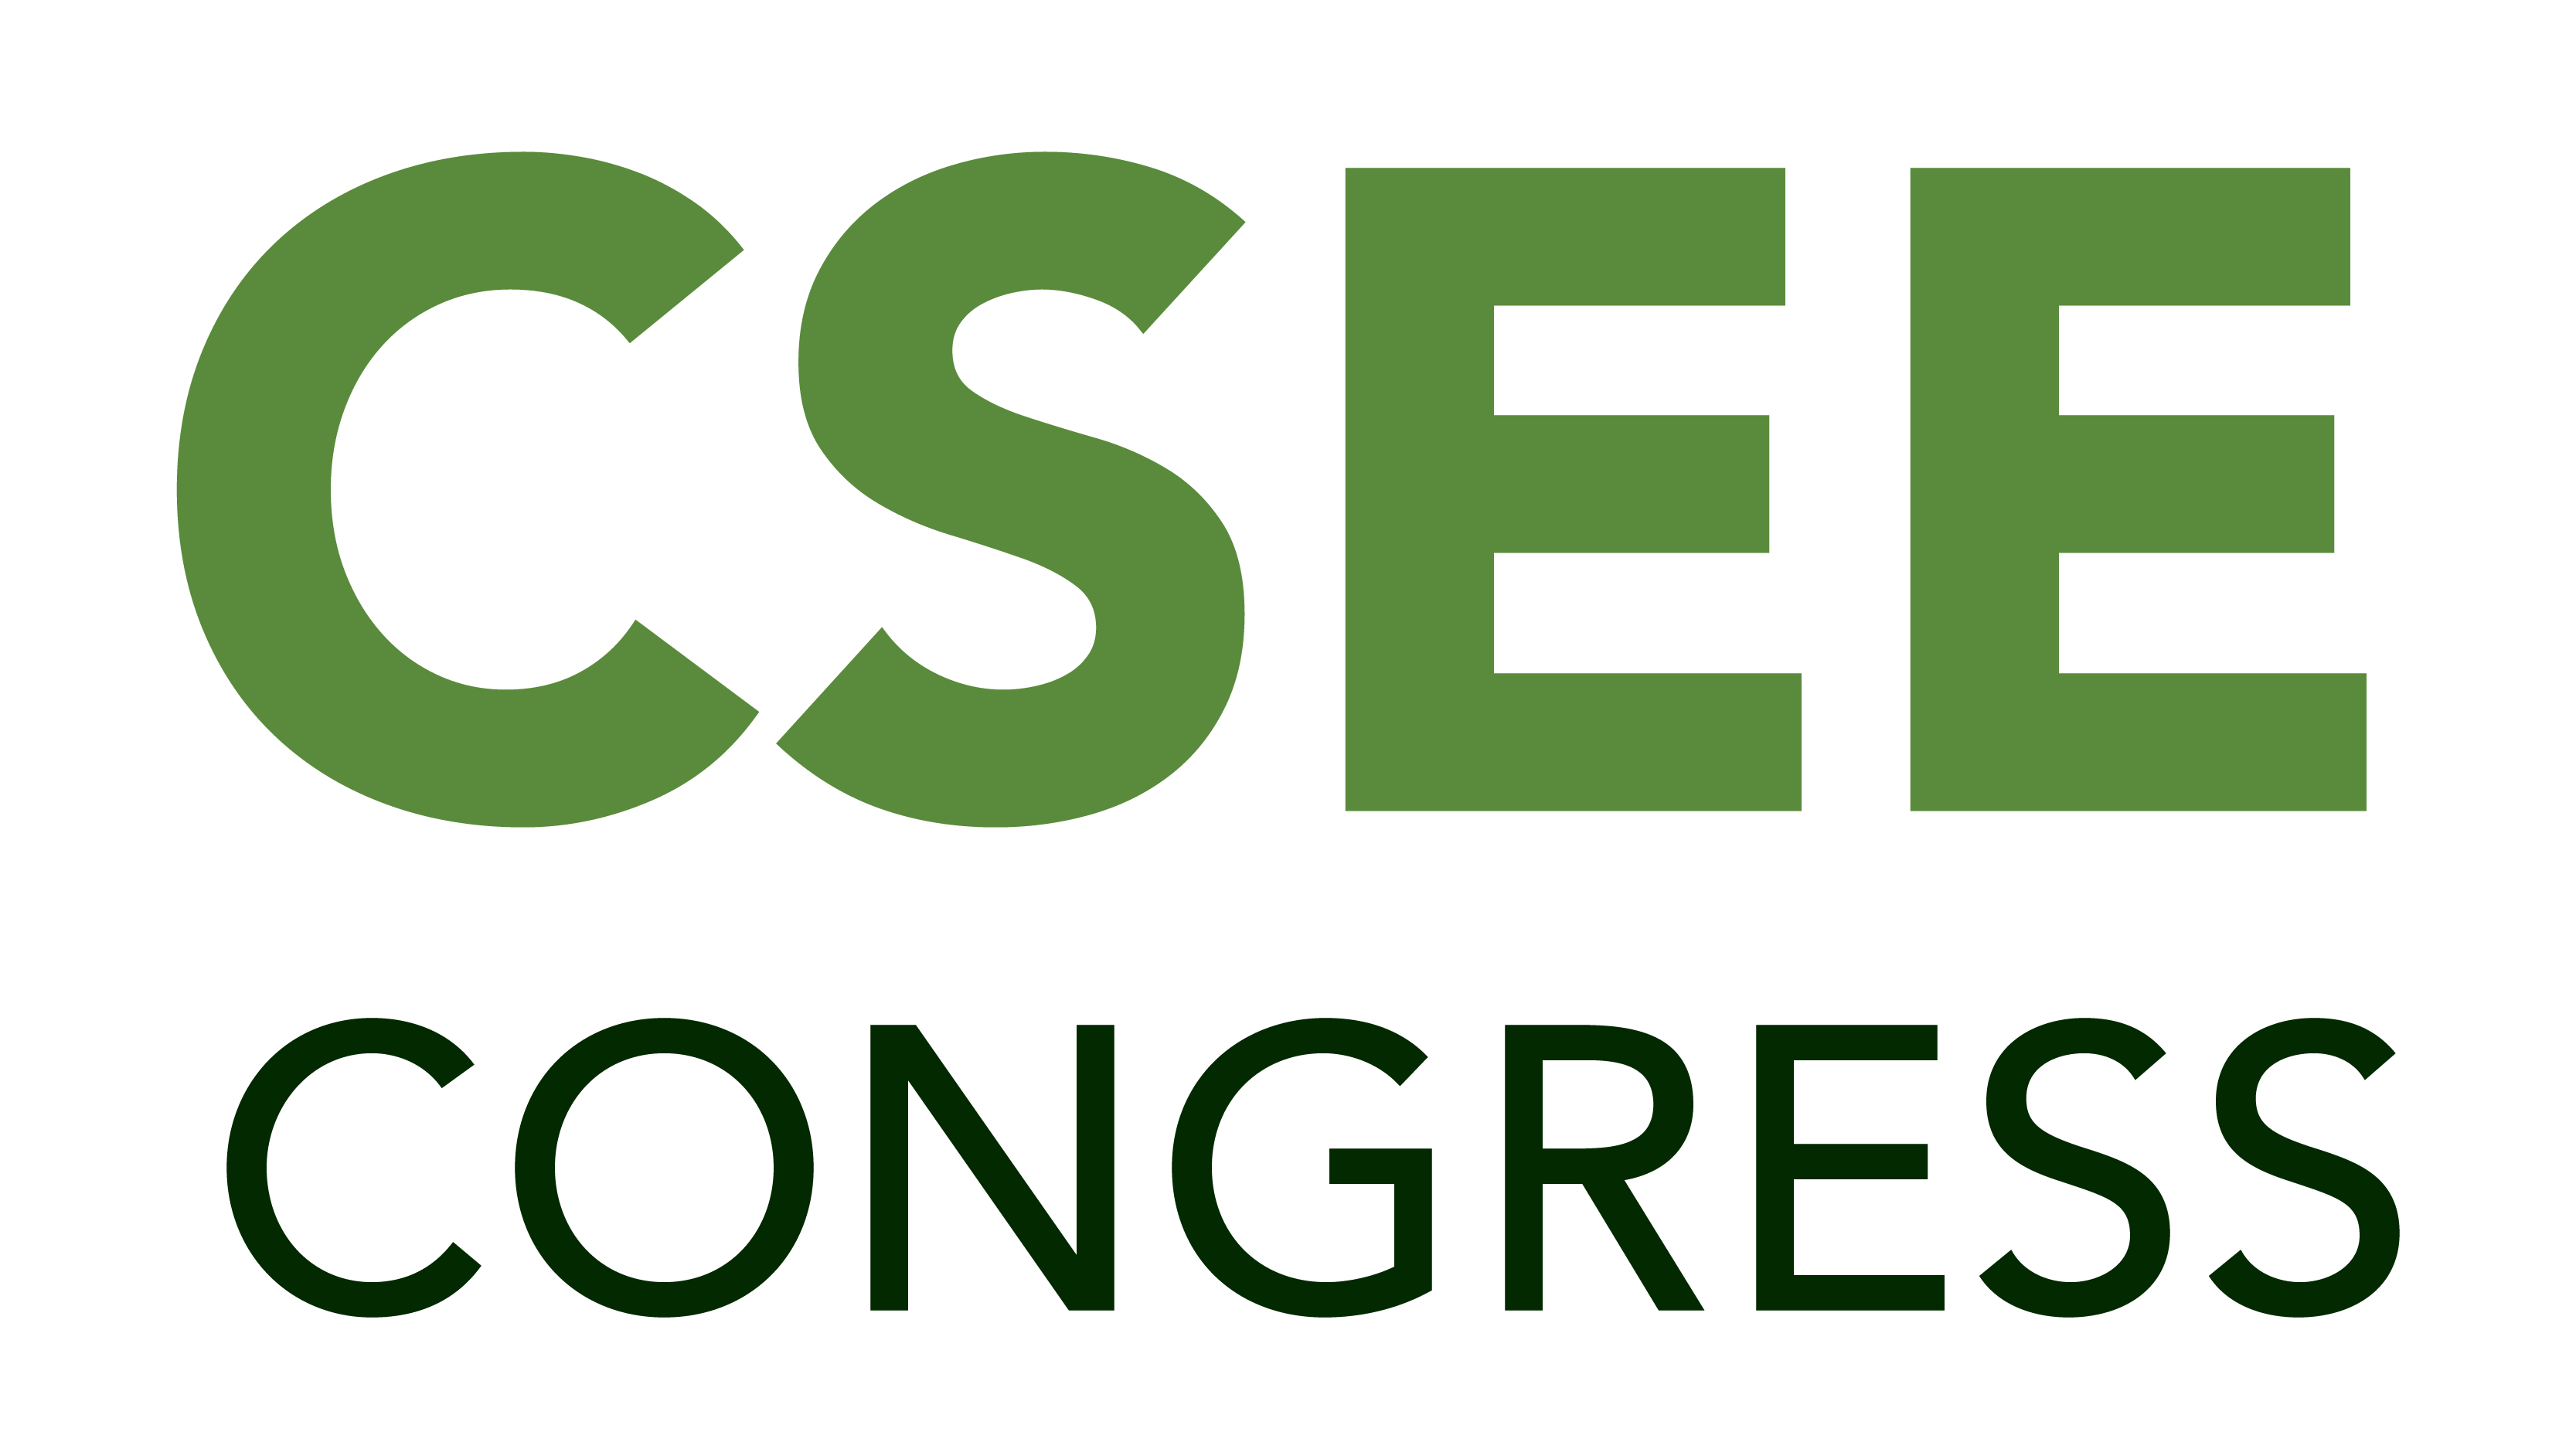 3rd World Congress on Civil, Structural, and Environmental Engineering, April 7 - 9, 2019 | Rome, Italy